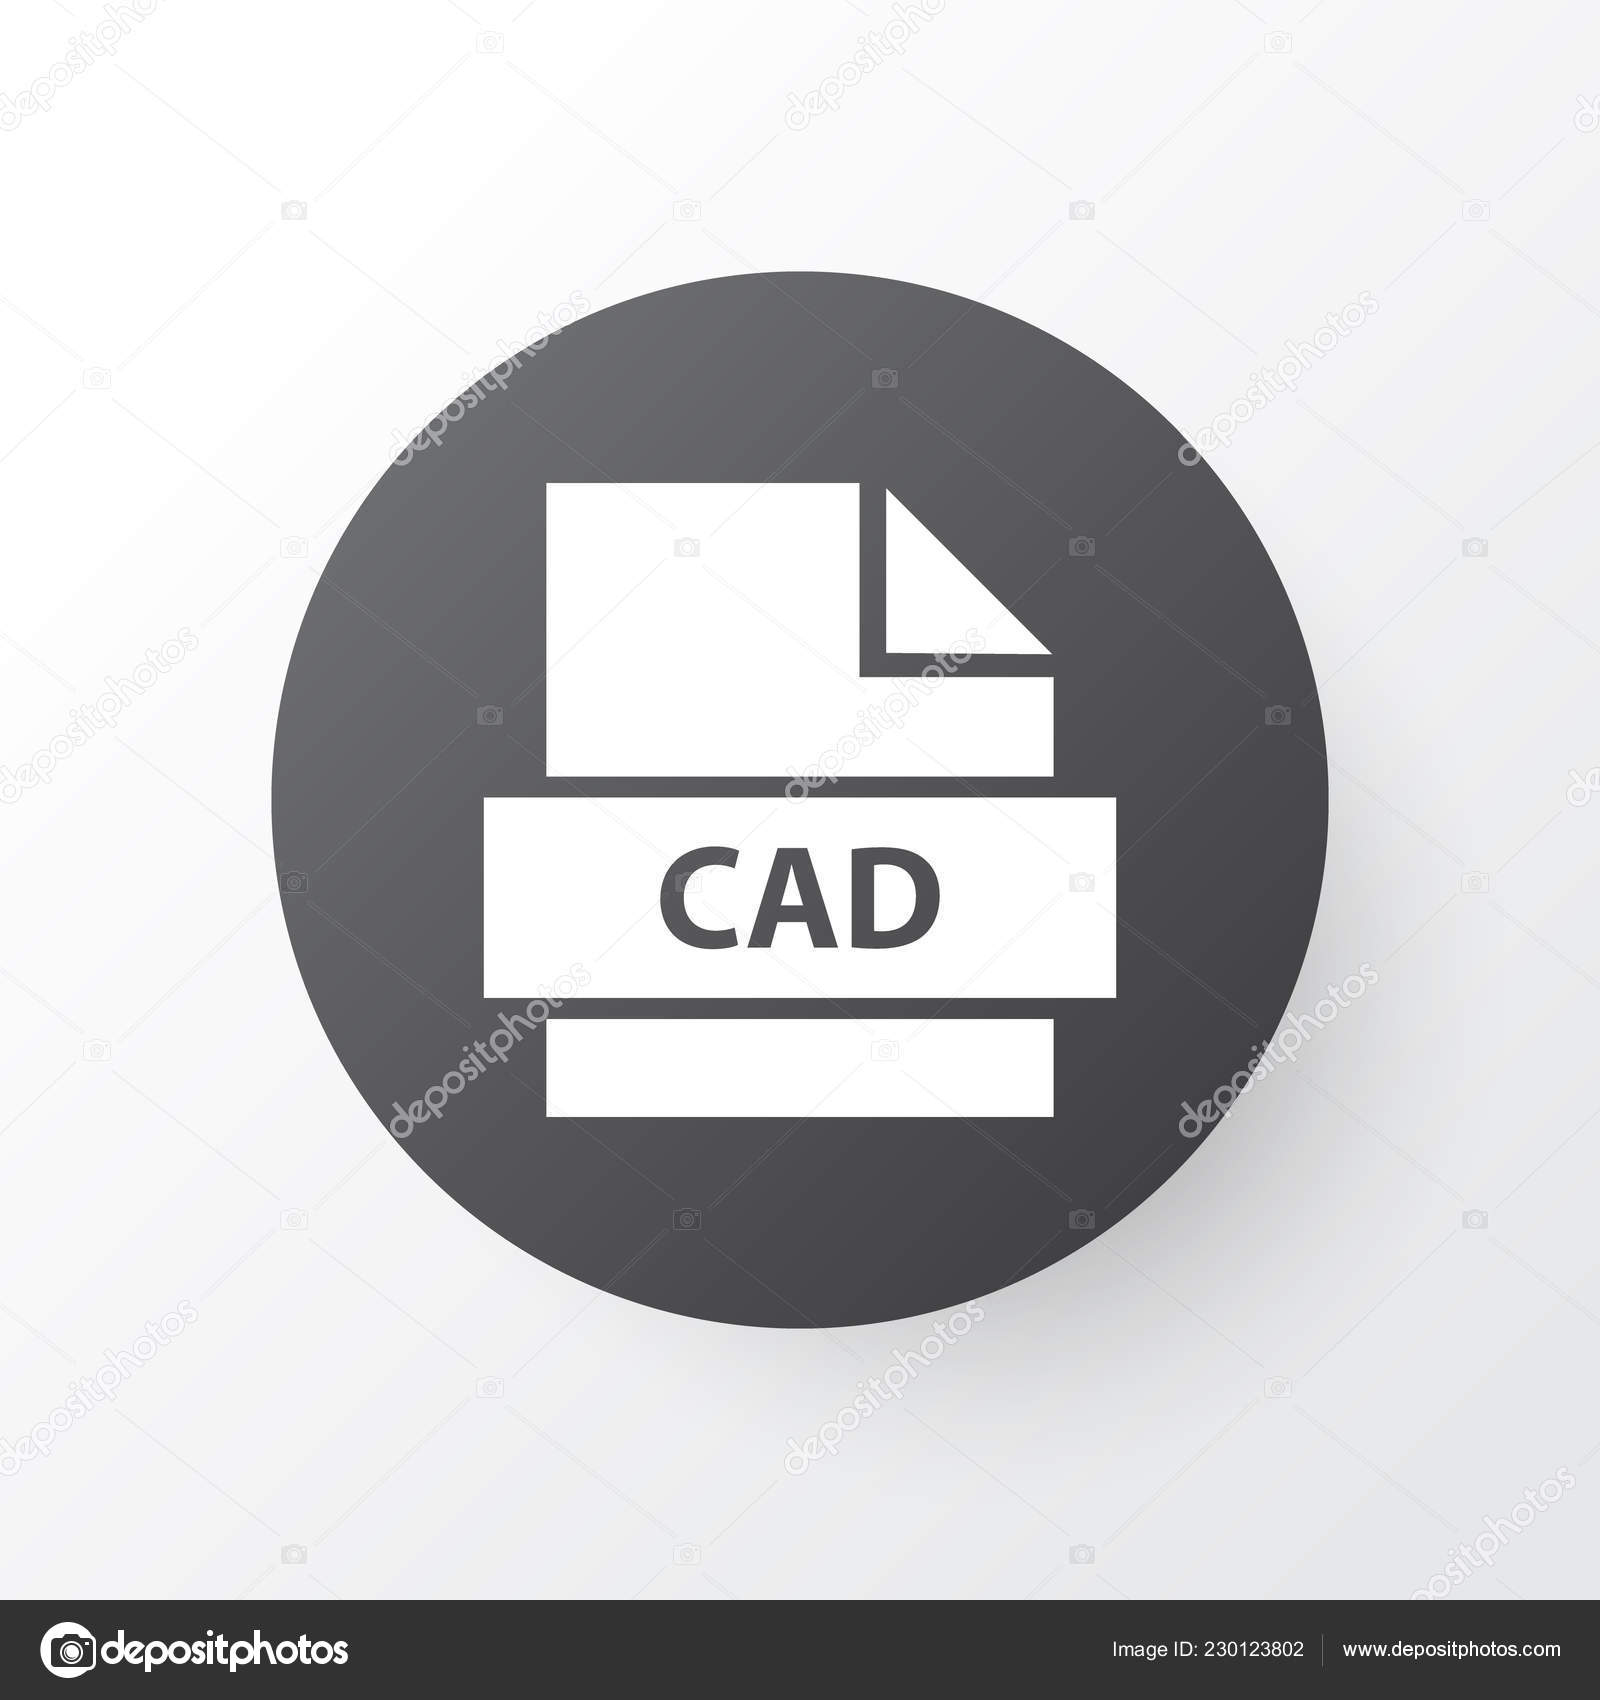 Cad Icon Symbol Premium Quality Isolated Design Element In Trendy Style Stock Vector C Aalbedouin Gmail Com 230123802 Mlf cadicon apk is a productivity apps on android. cad icon symbol premium quality isolated design element in trendy style stock vector c aalbedouin gmail com 230123802